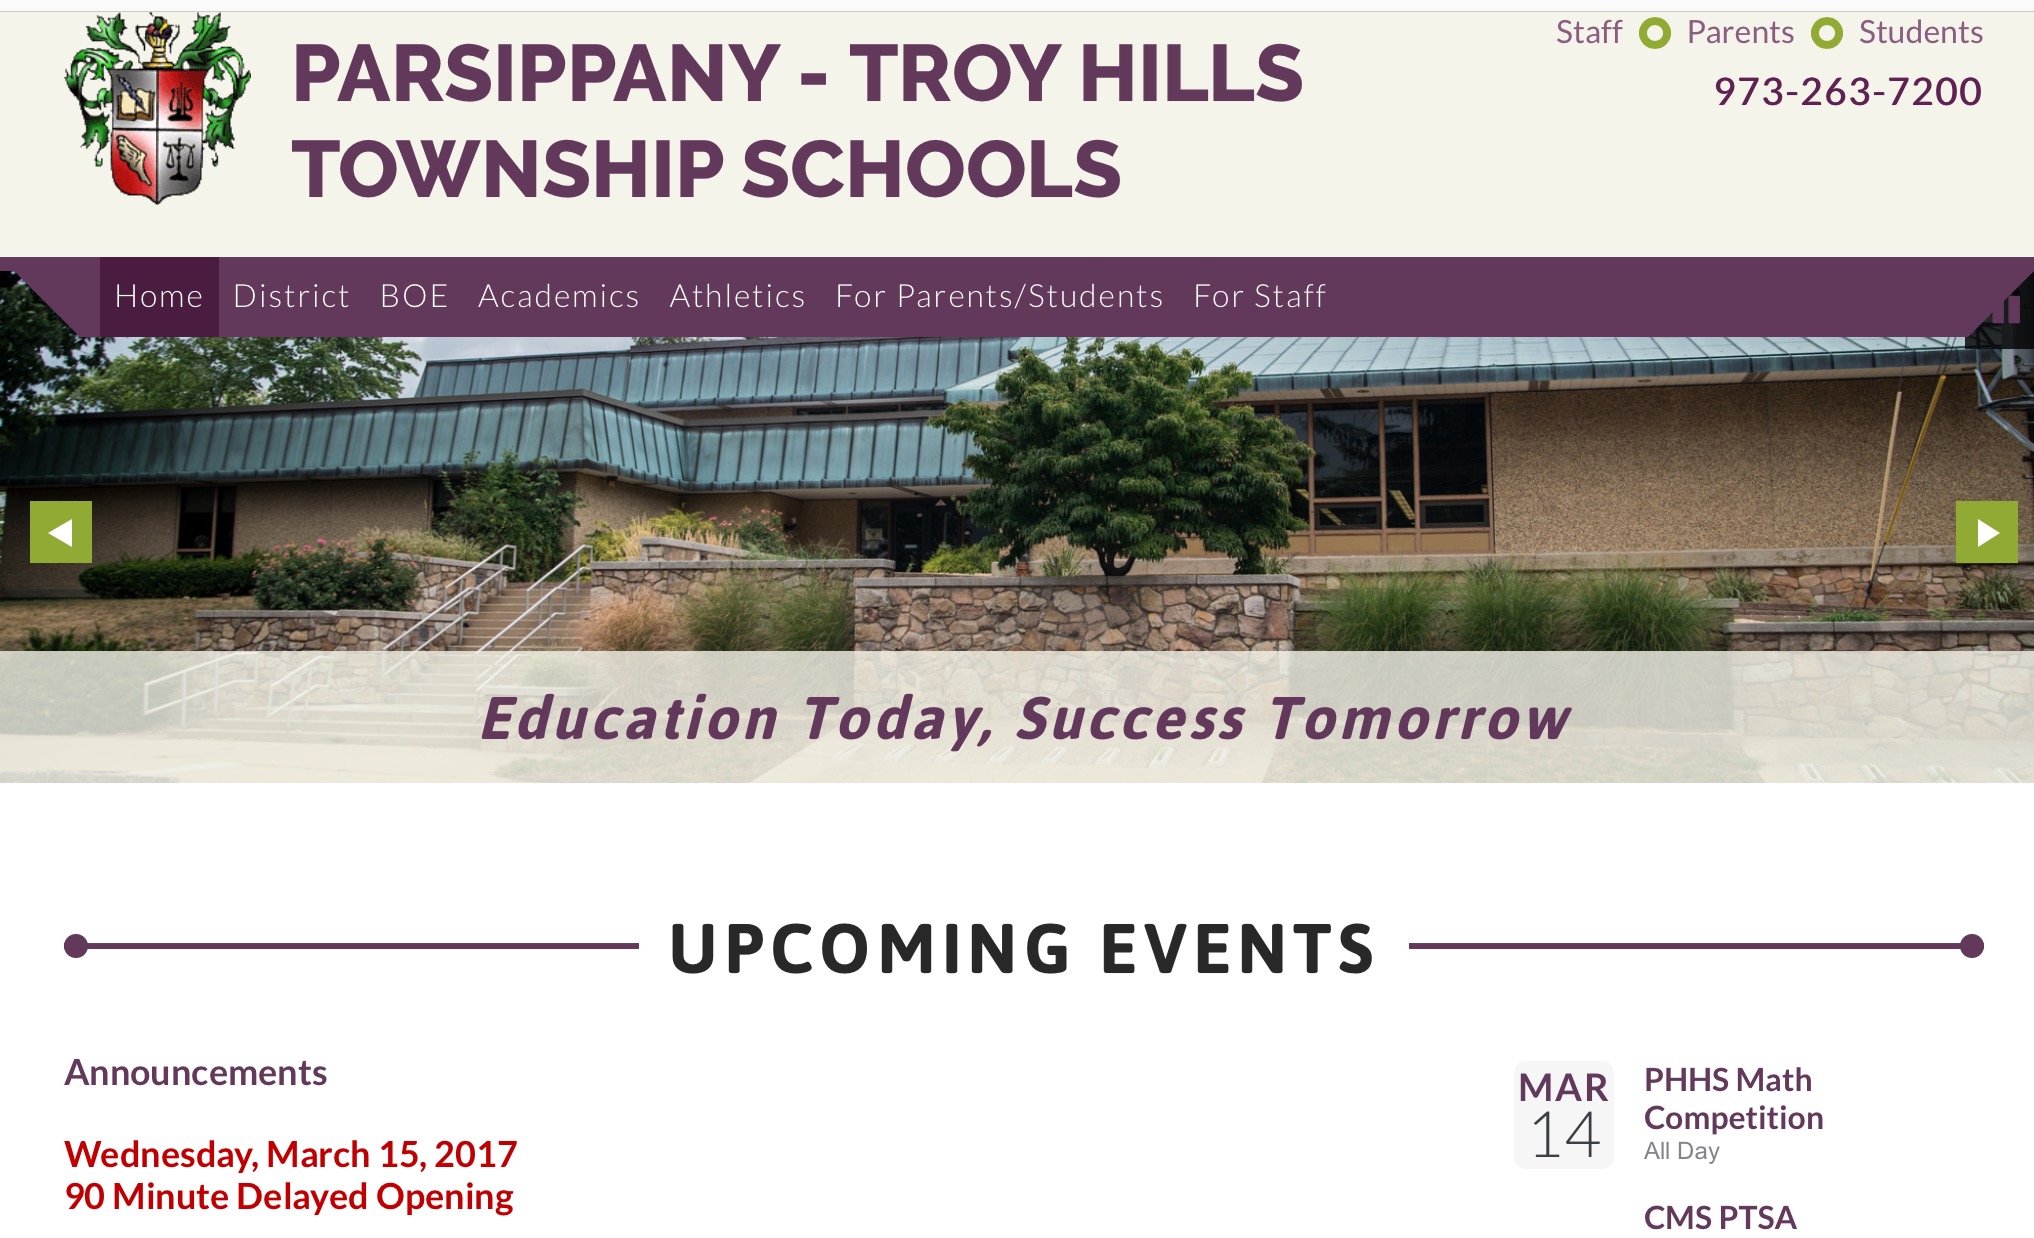 March 15th - Parsippany-Troy Hills Schools - 90 minute delayed opening